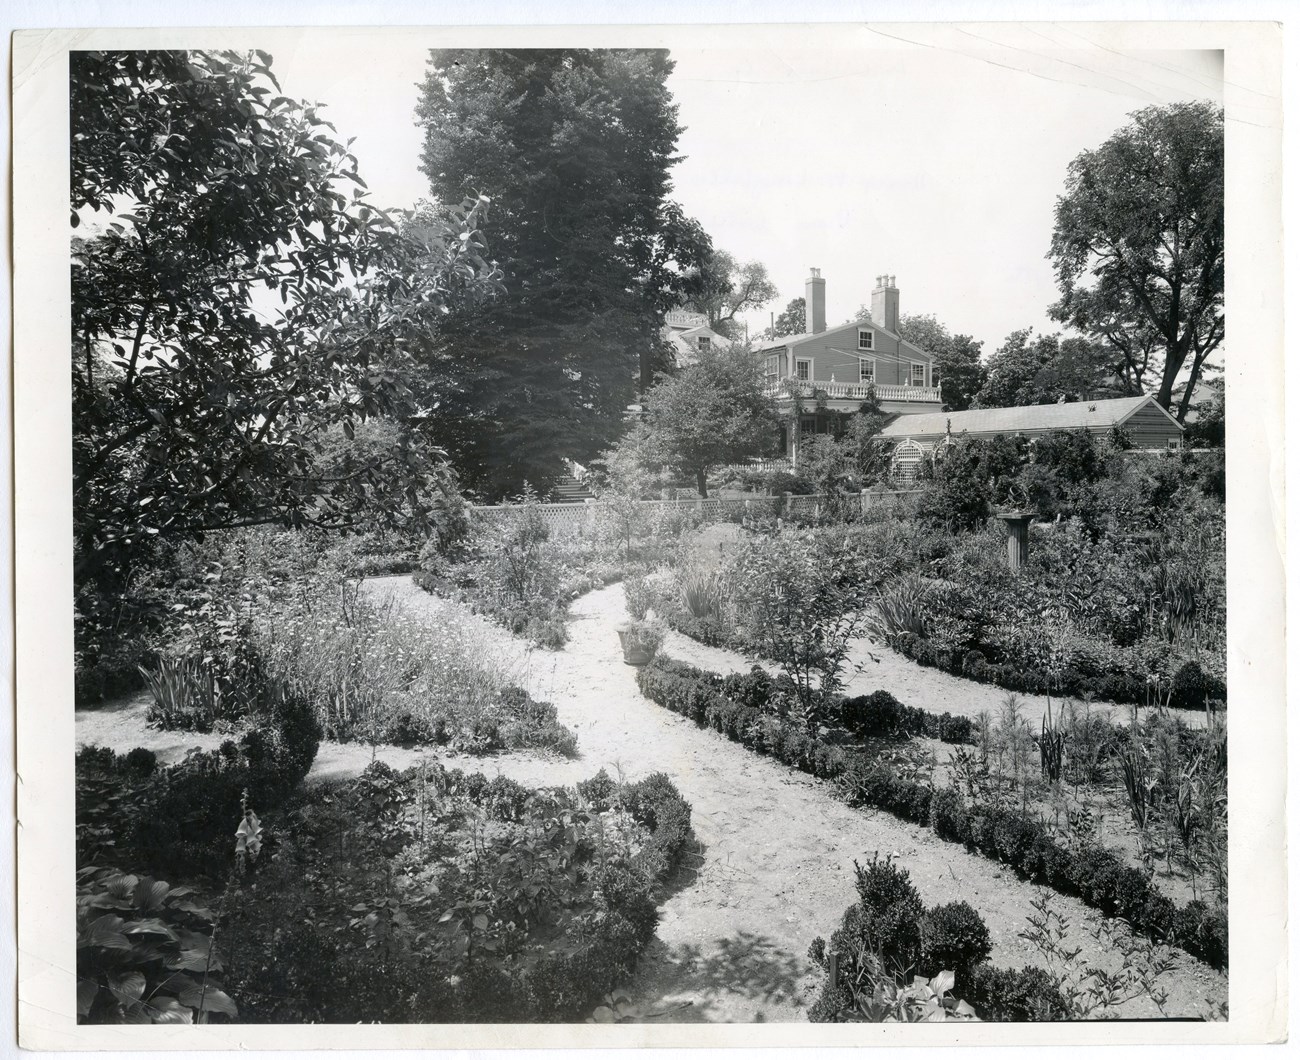 Black and white photo of curving paths in the formal garden, with the house and tall linden tree in the background.